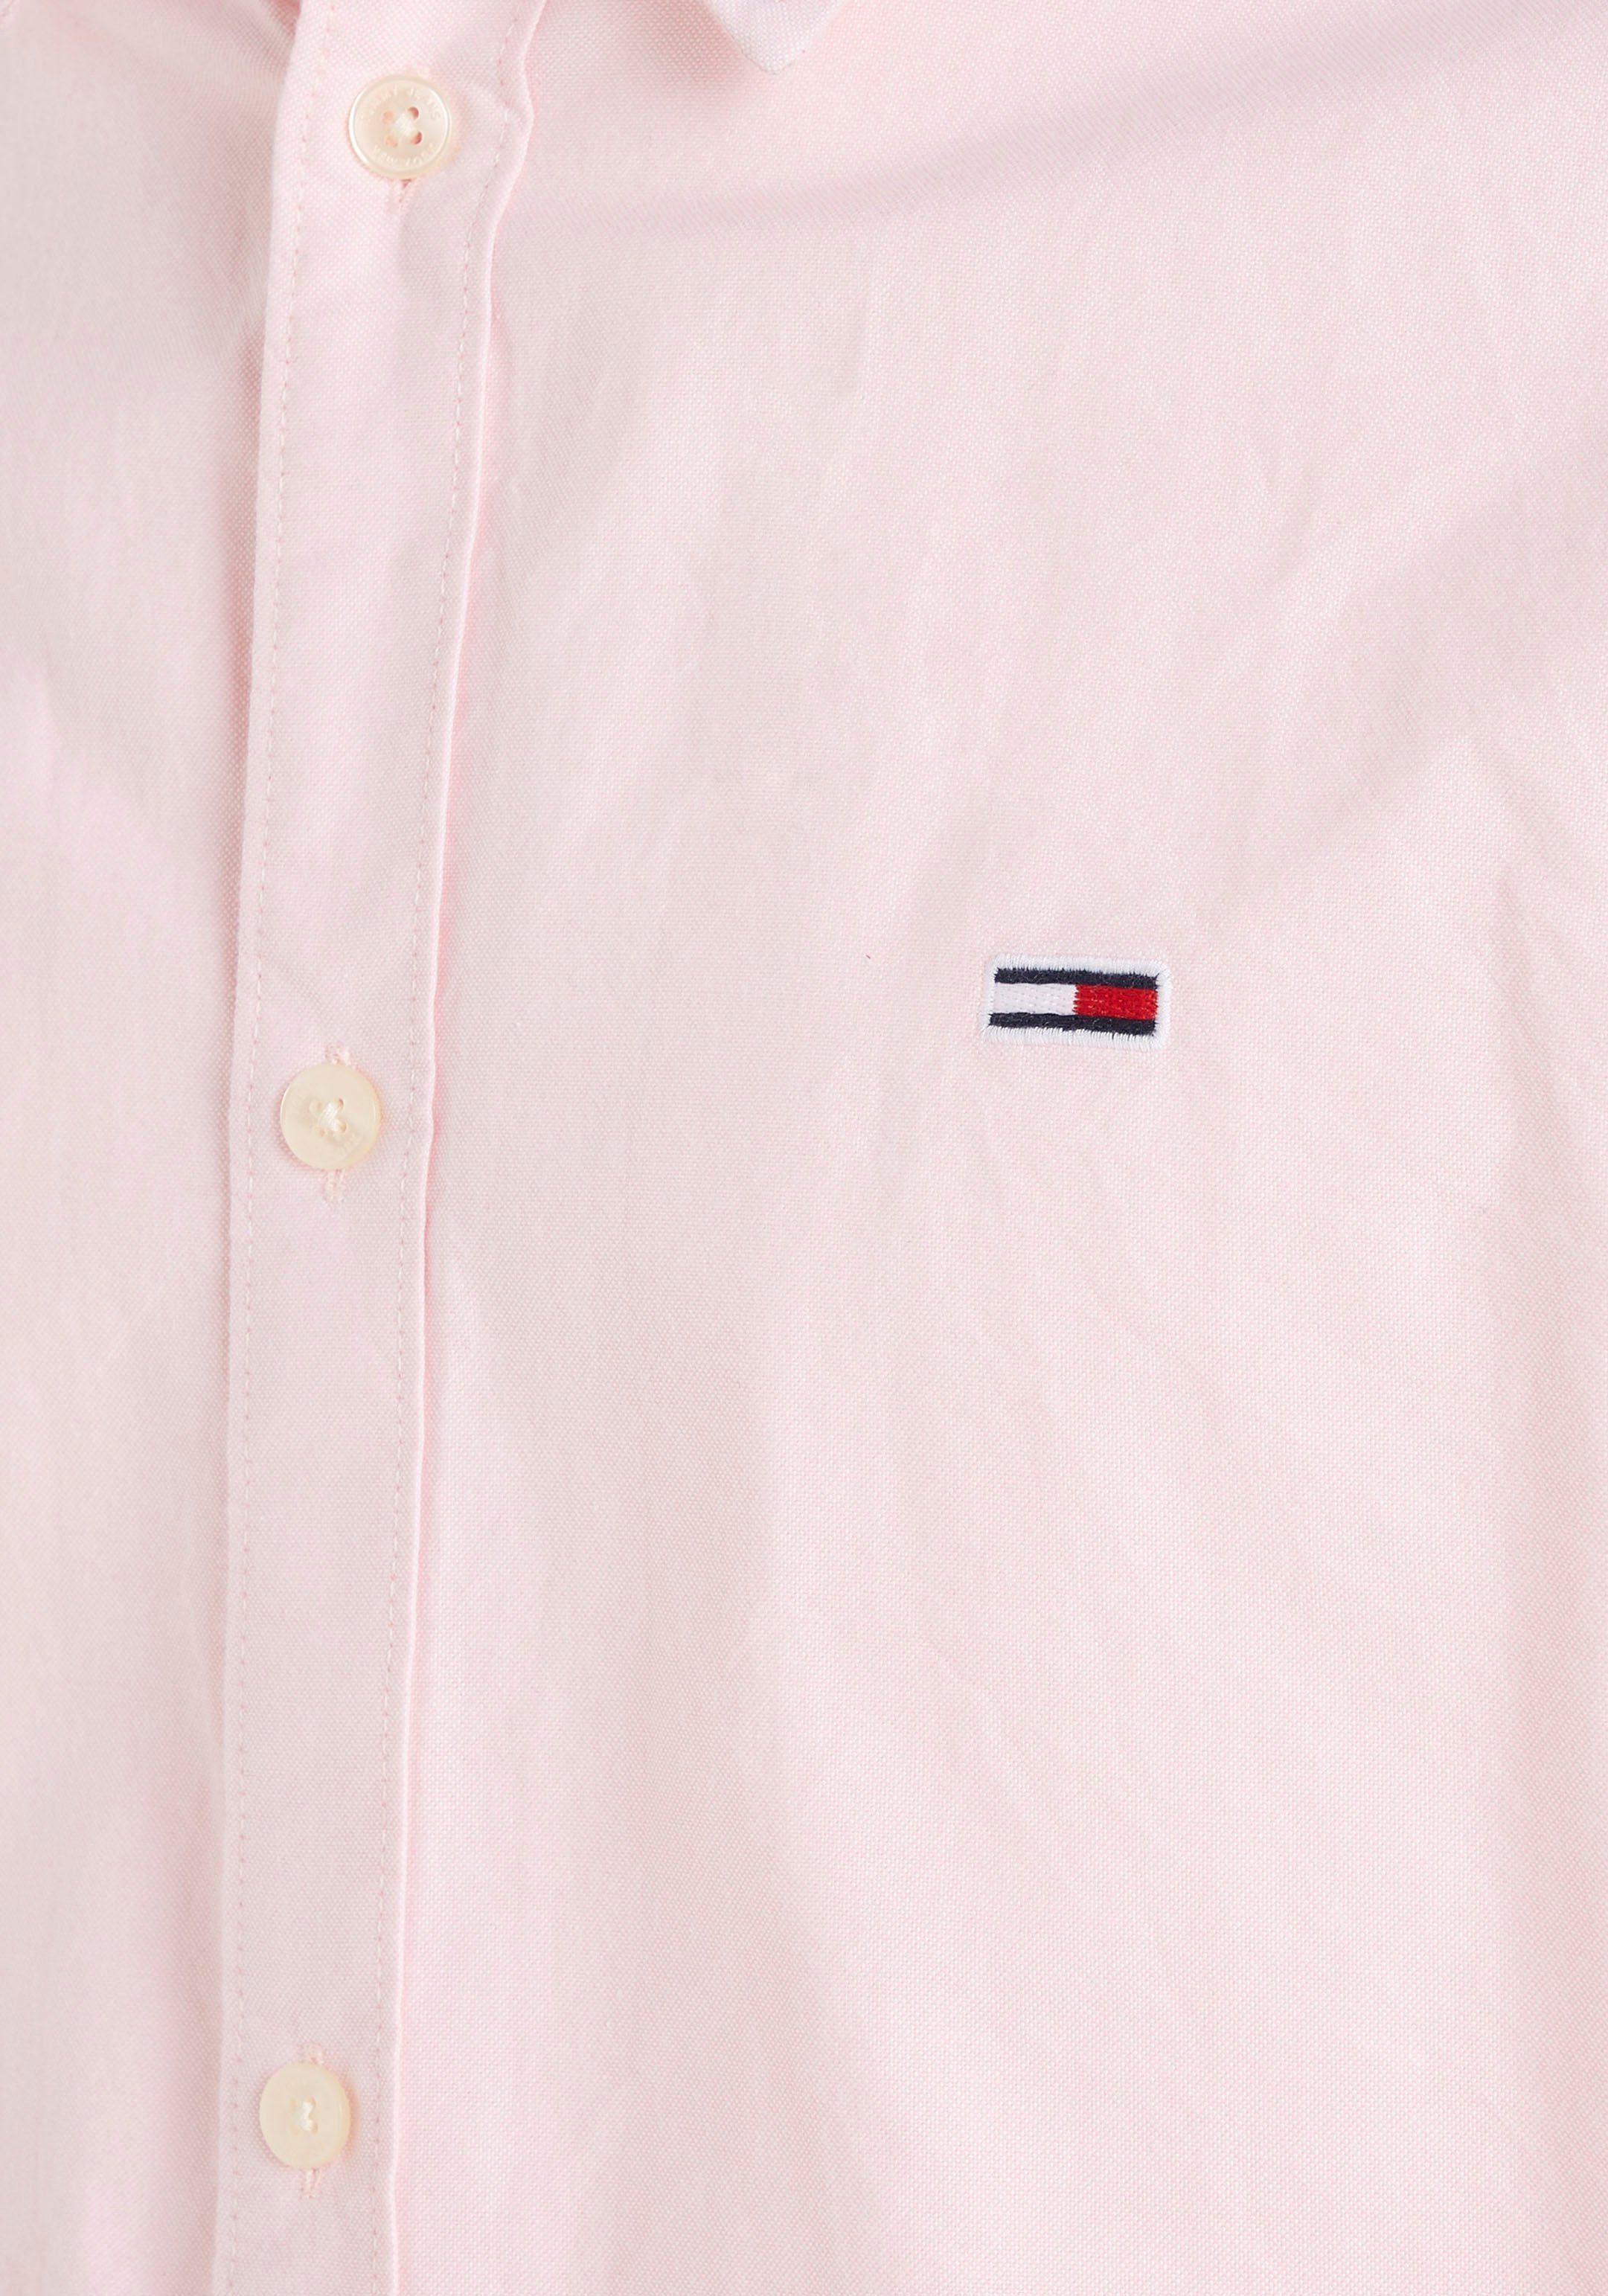 Tommy Jeans Langarmhemd TJM CLASSIC Knopfleiste SHIRT mit pink OXFORD